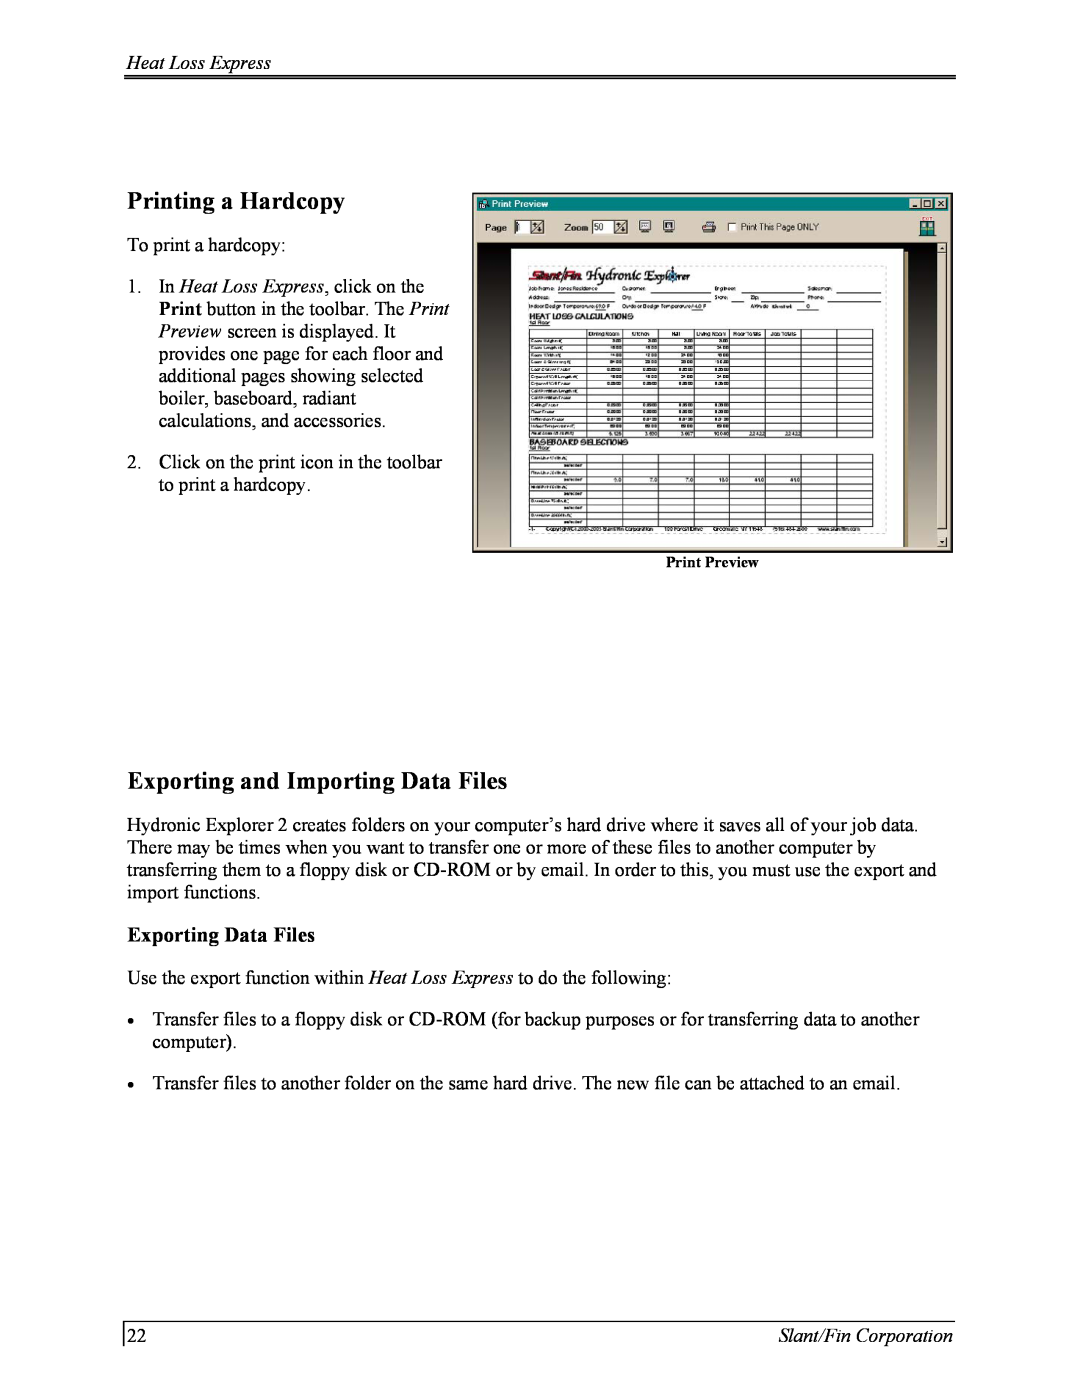 Slant/Fin Hydronic Explorer 2 user manual Printing a Hardcopy, Exporting and Importing Data Files, Exporting Data Files 